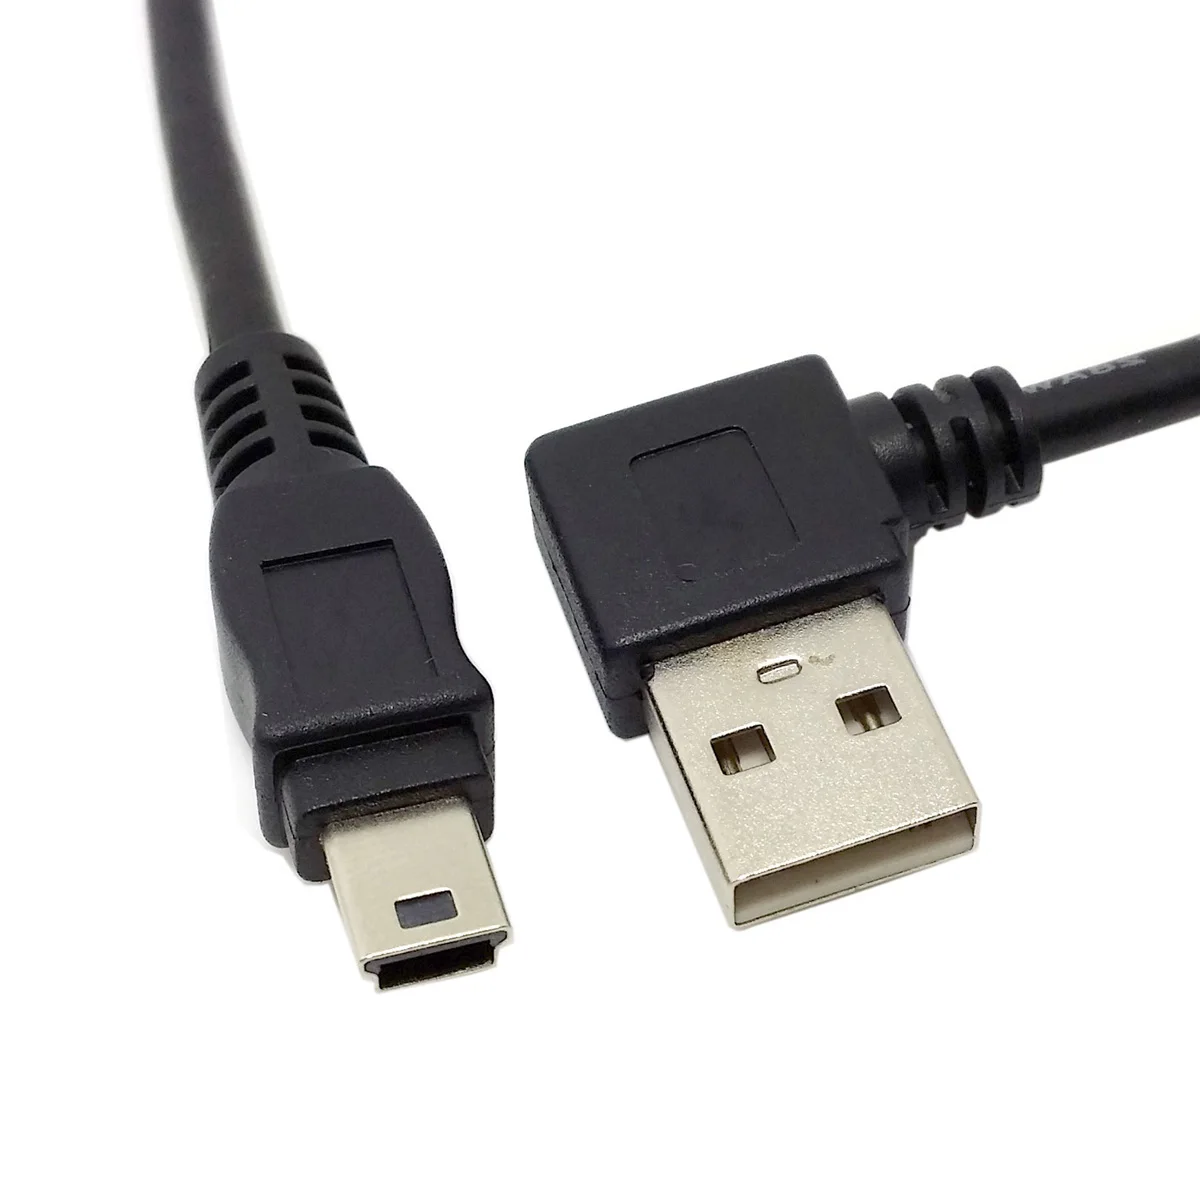 

CYDZ CY USB 2.0 A Male Left Angled 90 Degree to USB Mini B Male Cable 50cm